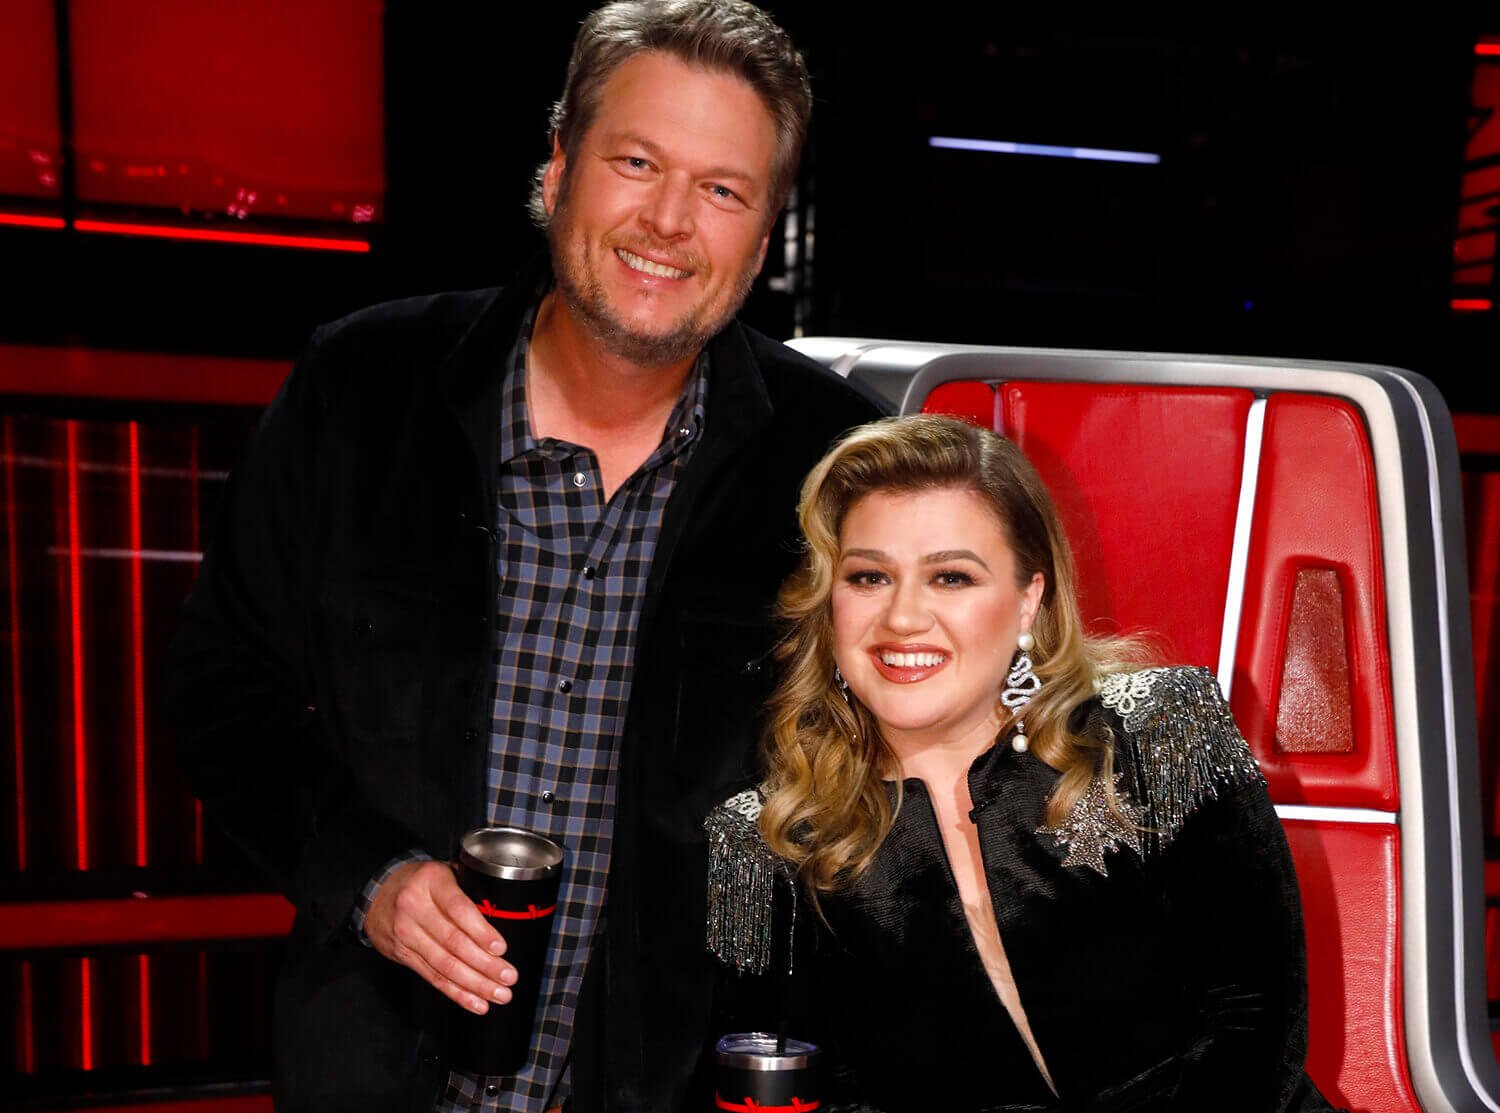 Blake Shelton stands beside Kelly Clarkson sitting in her chair on The Voice